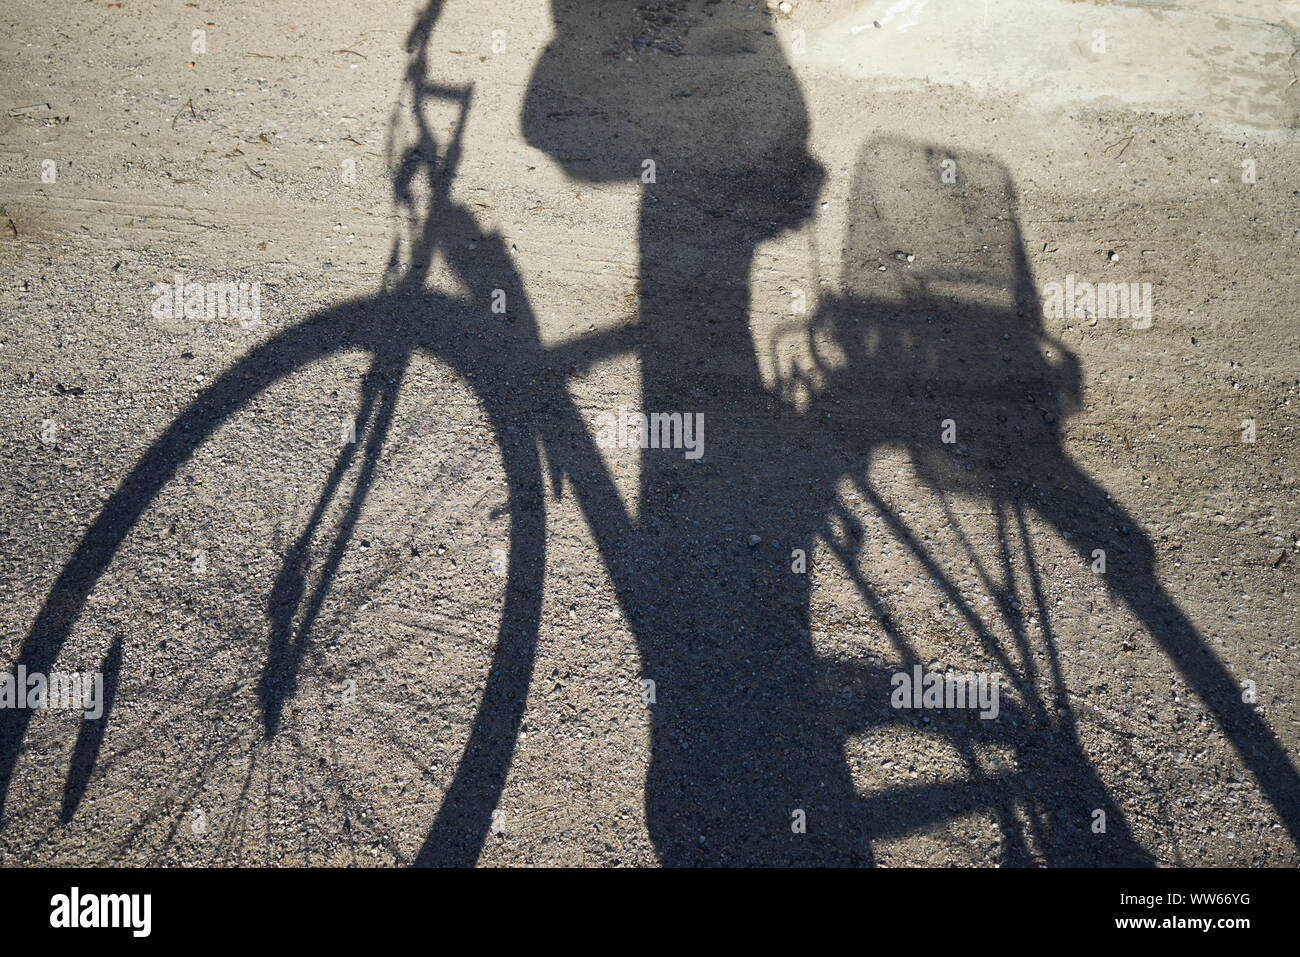 Shadow of a bicycle with person on the floor Stock Photo